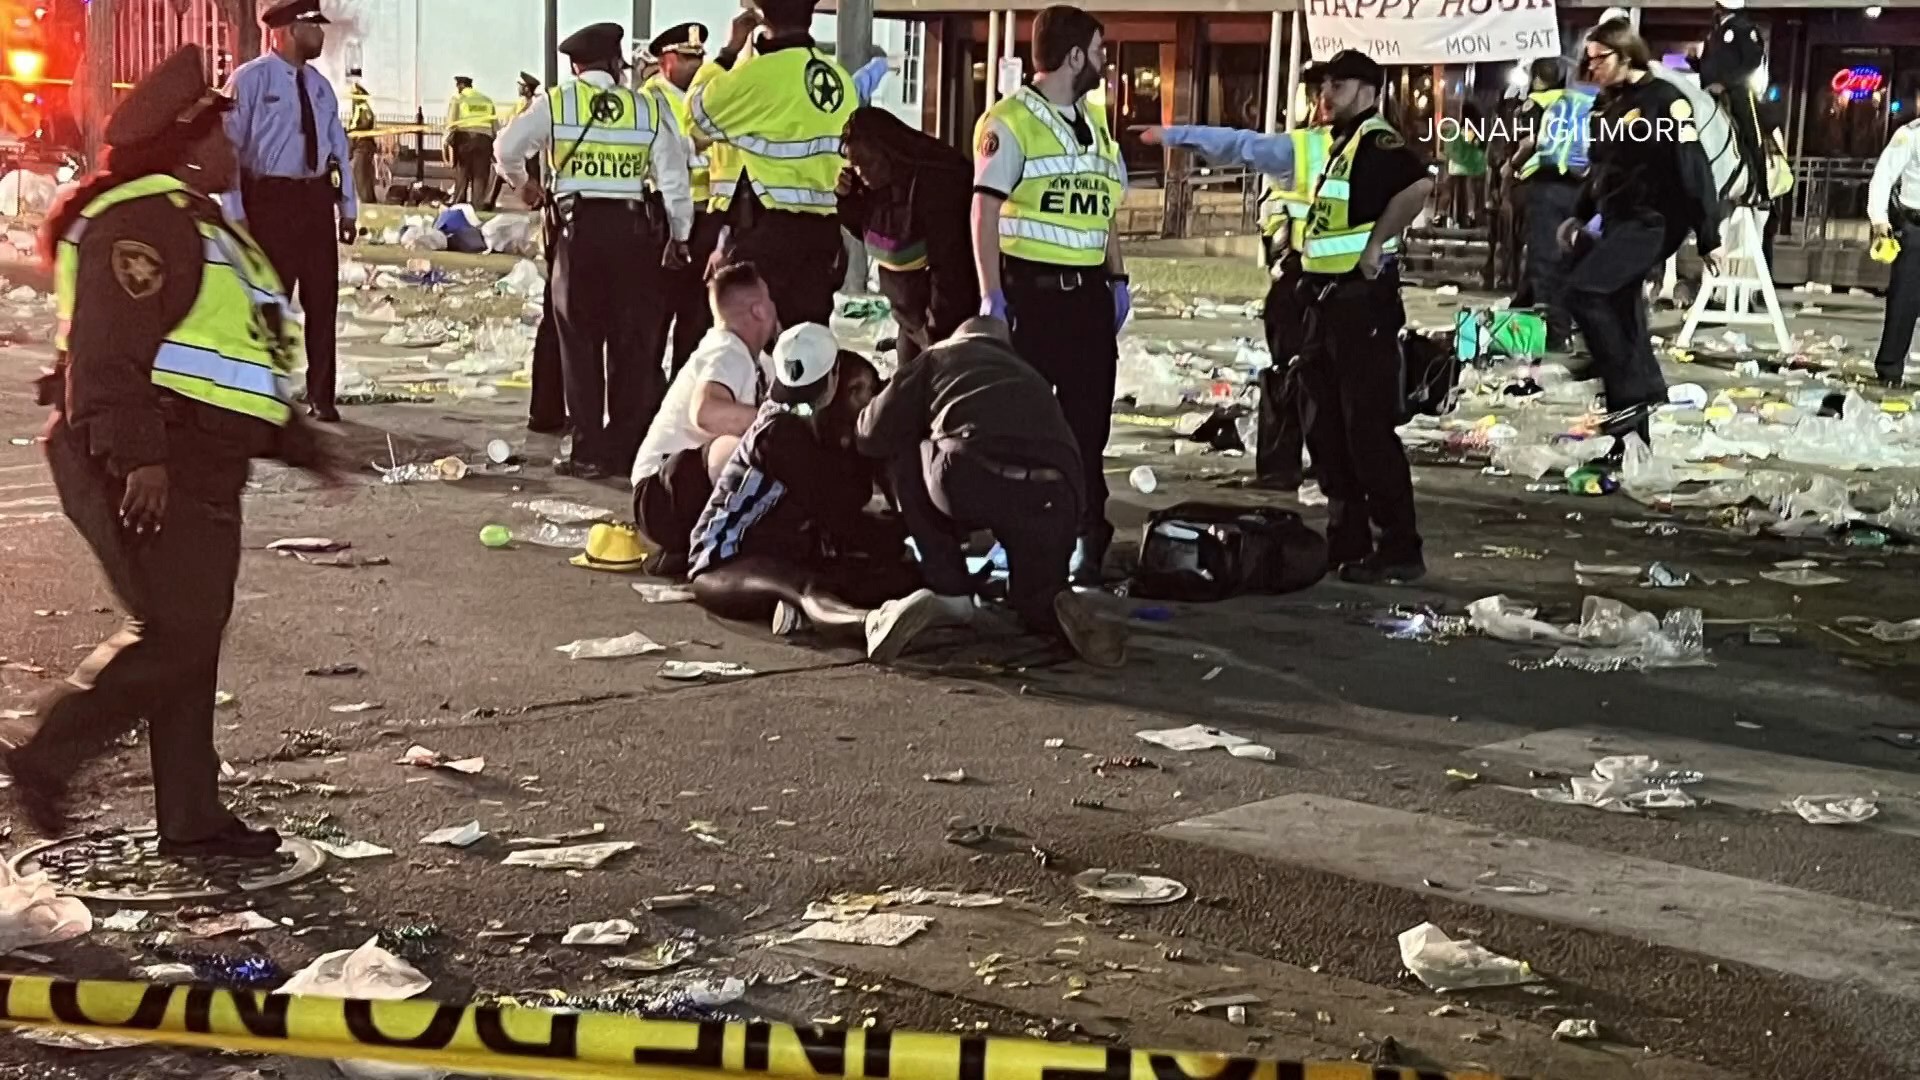 An eyewitness said that when the shots started flying, people were falling all over the place trying to get away and leaving their belongings behind.